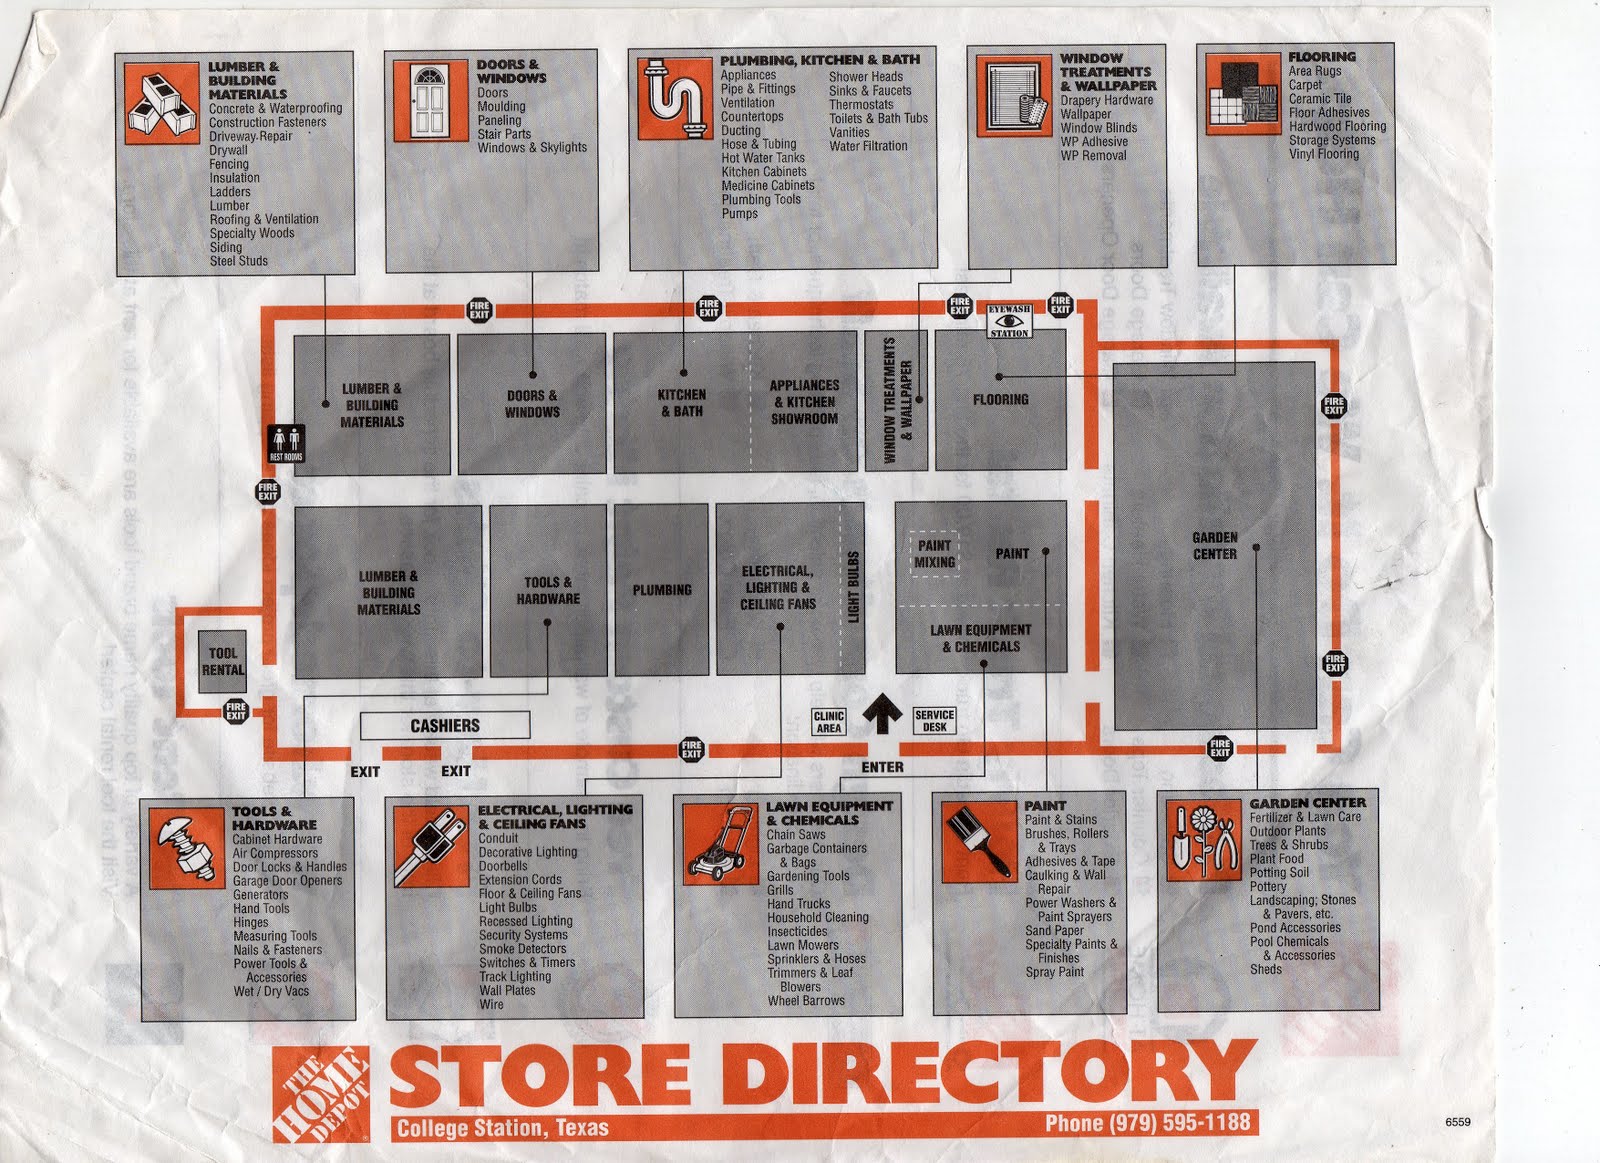 Home Depot Store Layout Map >>